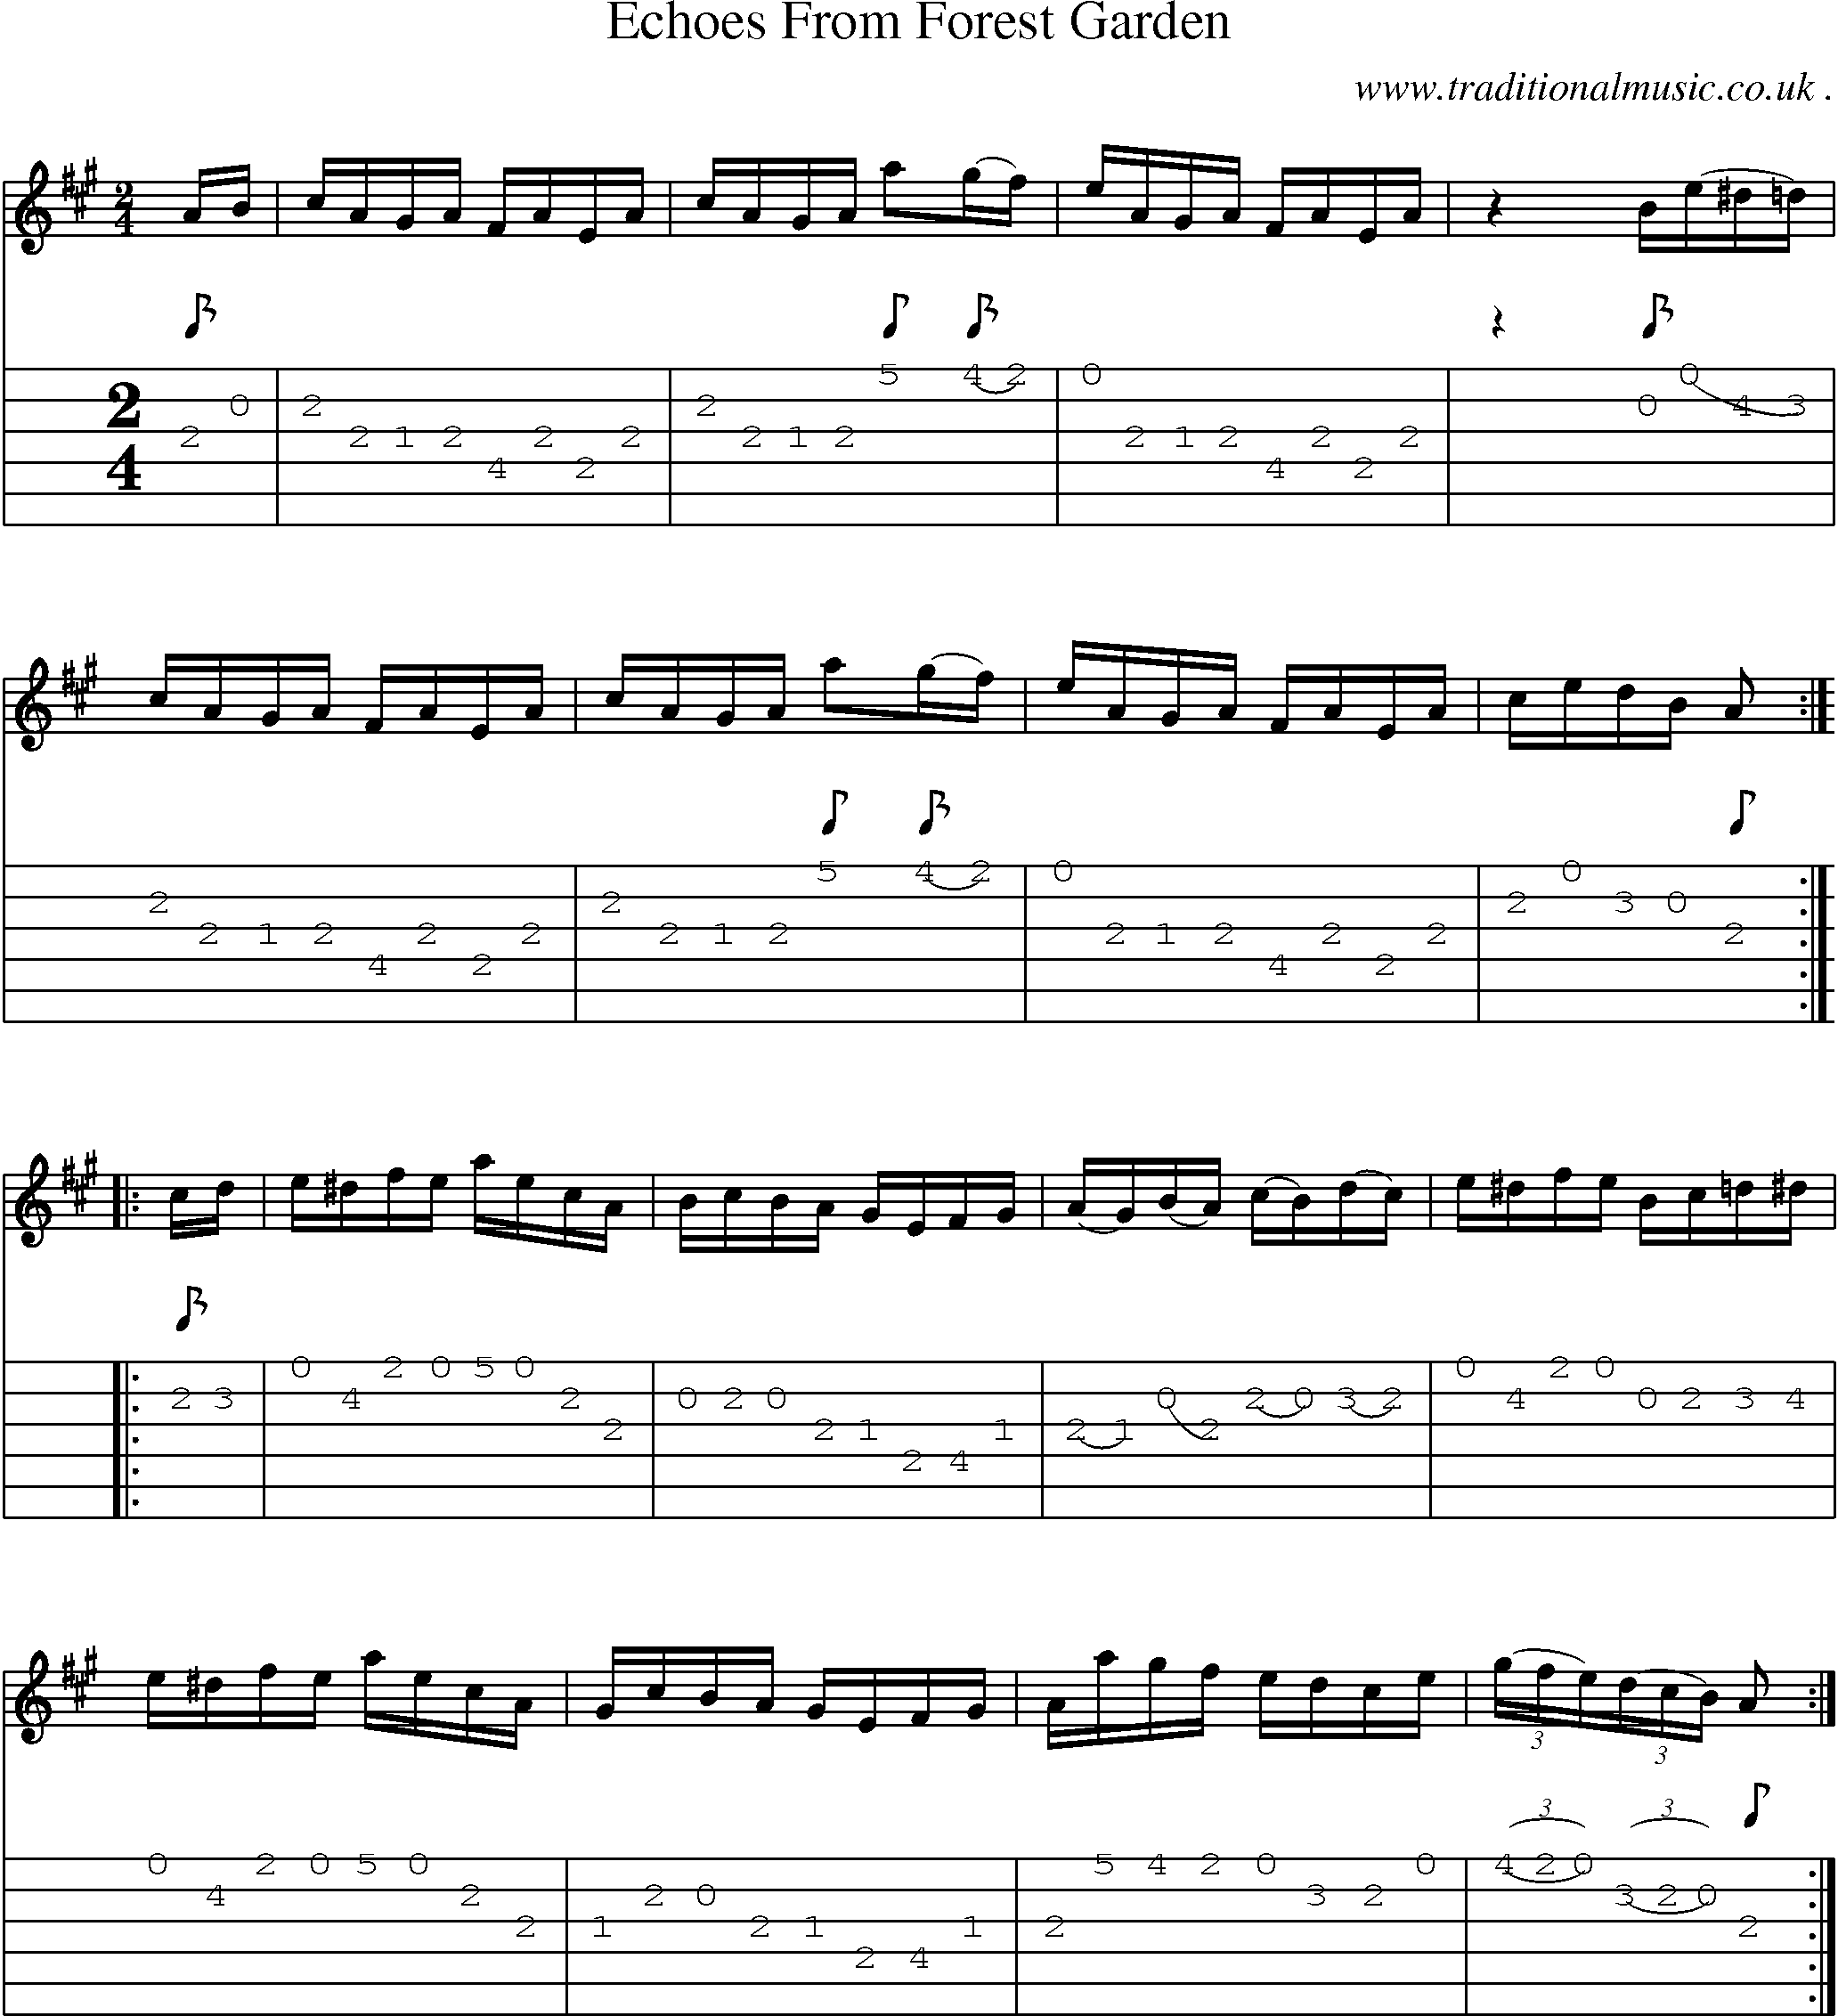 Sheet-Music and Guitar Tabs for Echoes From Forest Garden